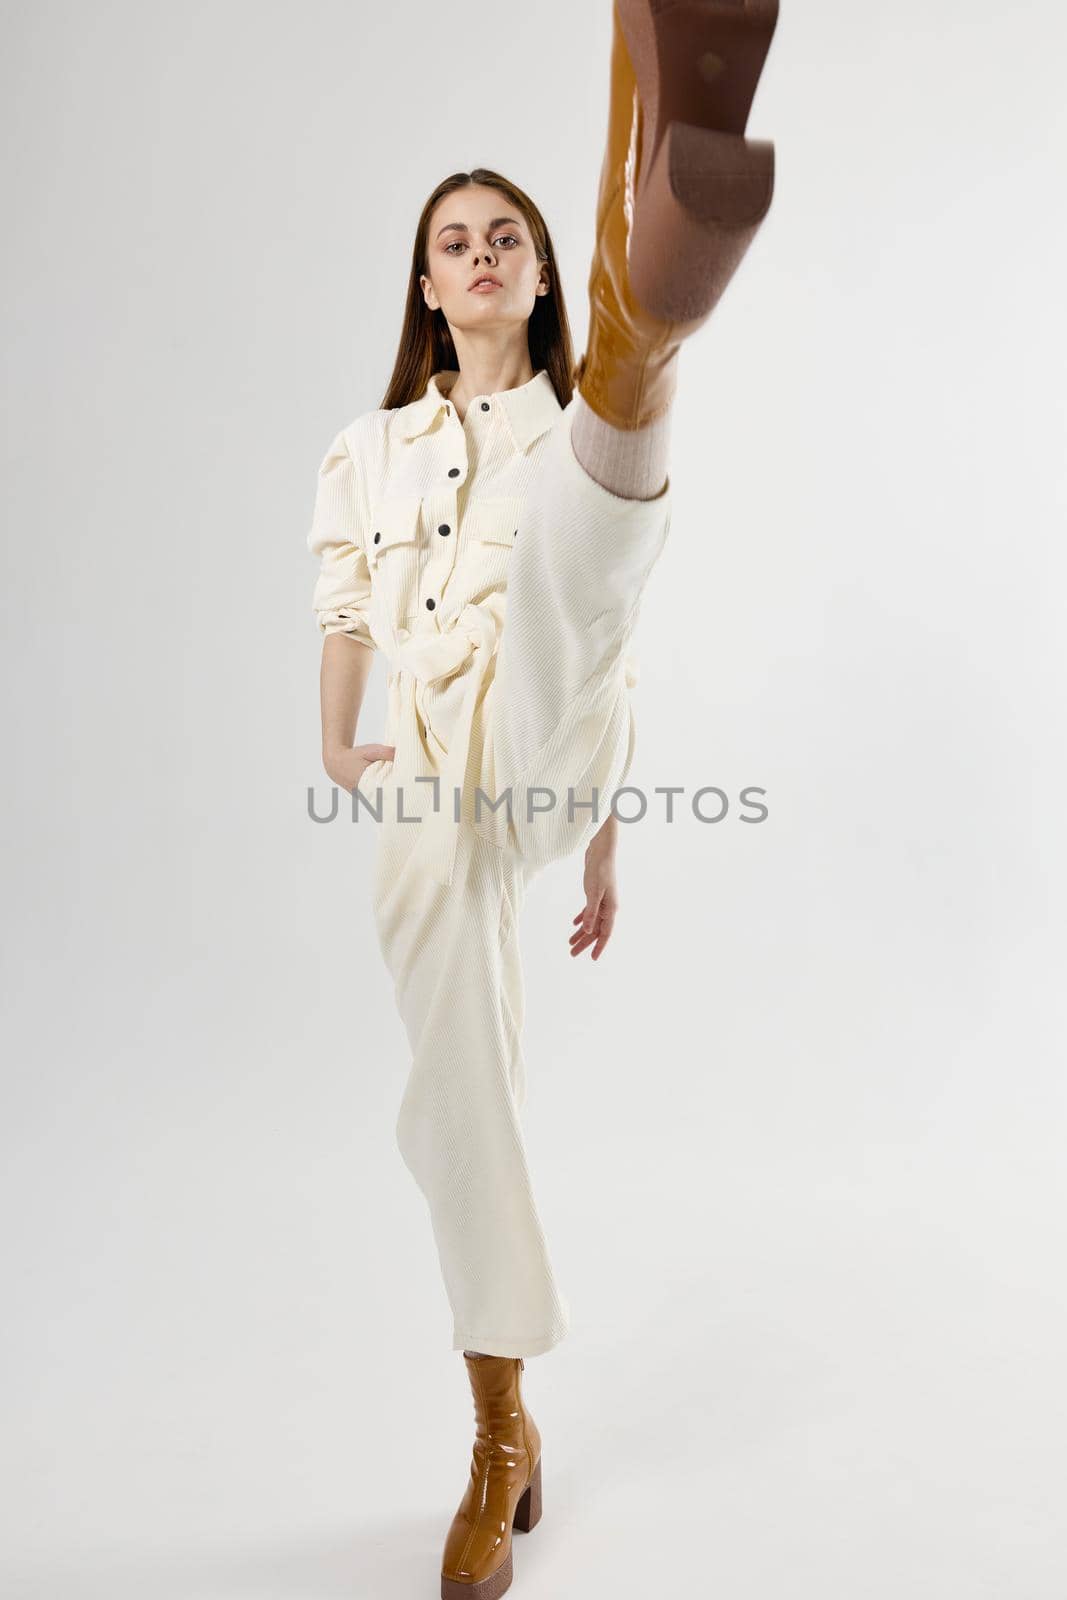 pretty woman in suit holds hand in pocket moda studio light background. High quality photo